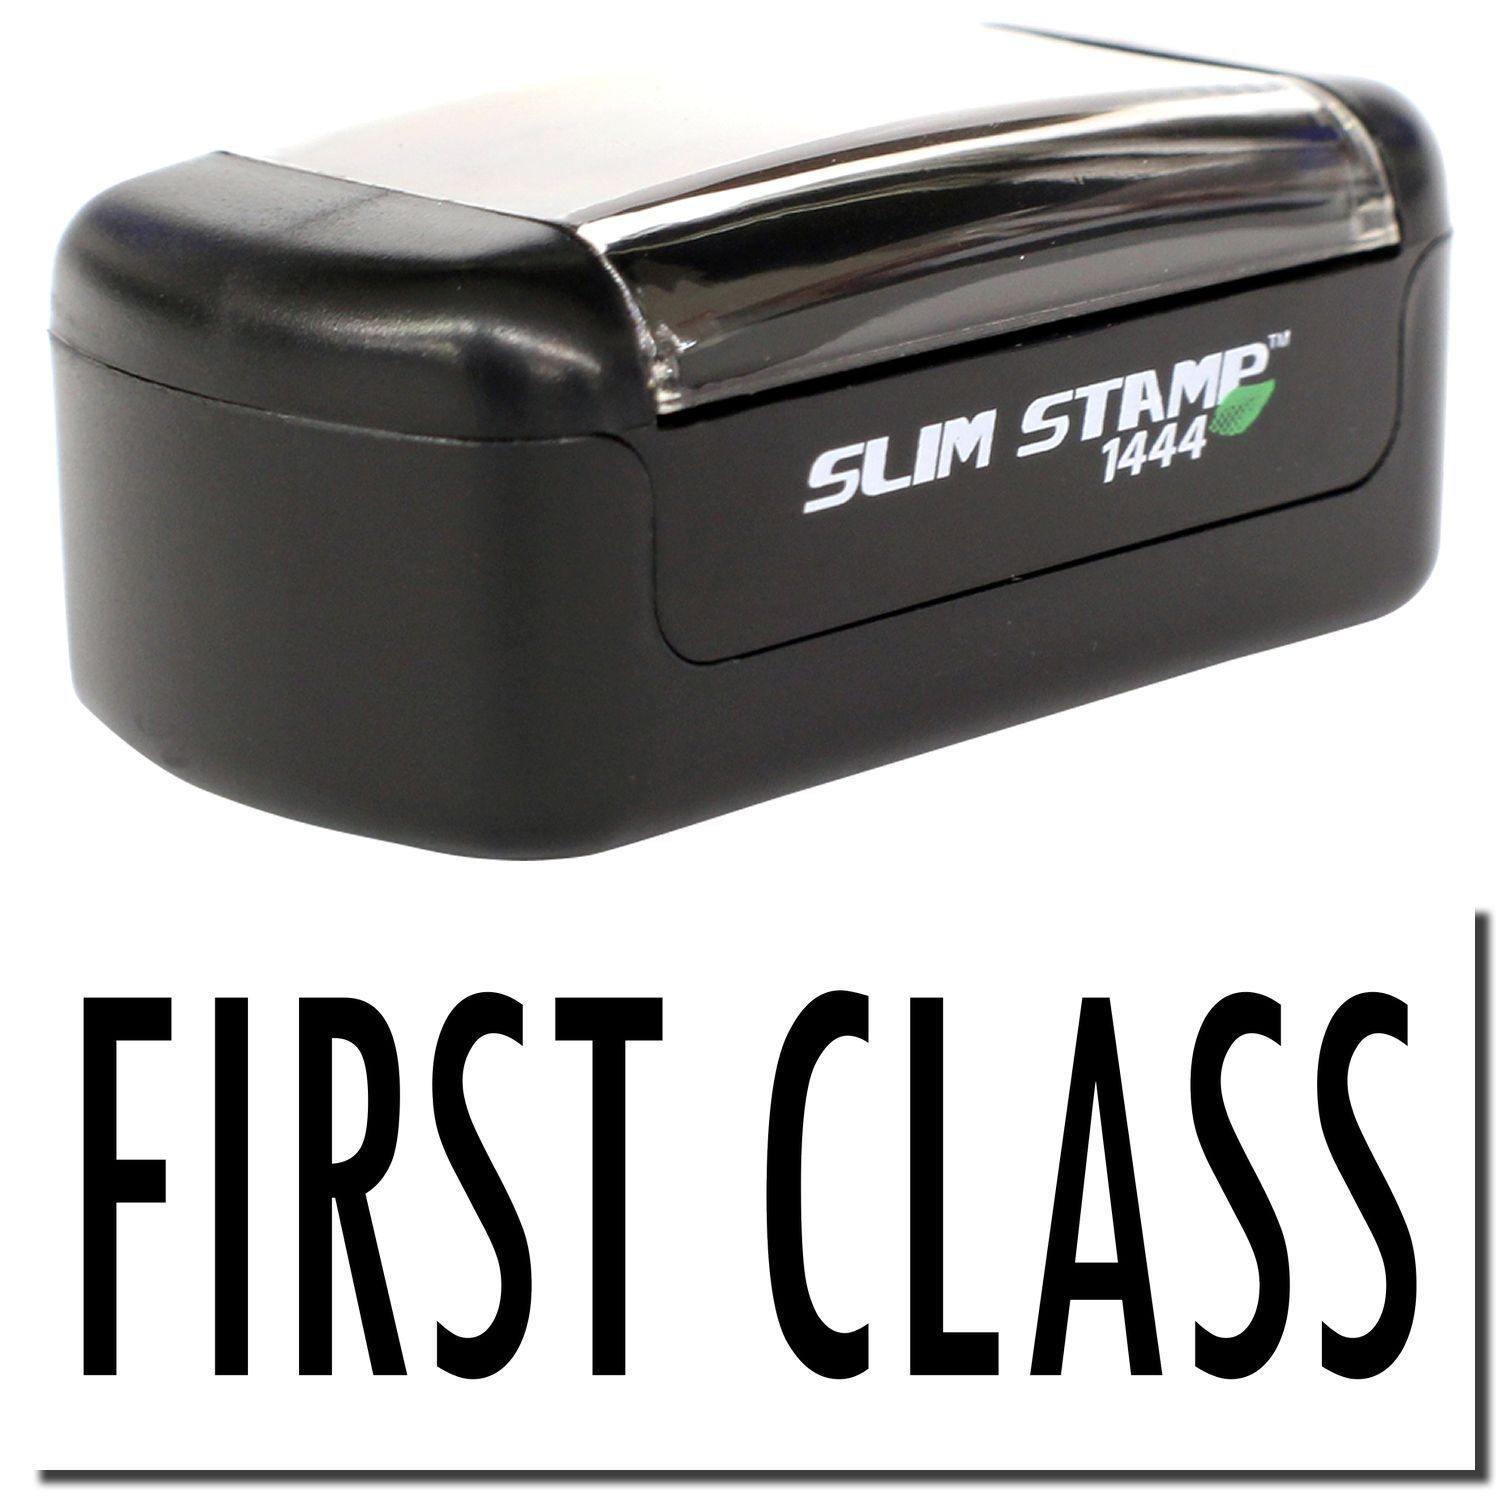 A stock office pre-inked stamp with a stamped image showing how the text "FIRST CLASS" is displayed after stamping.